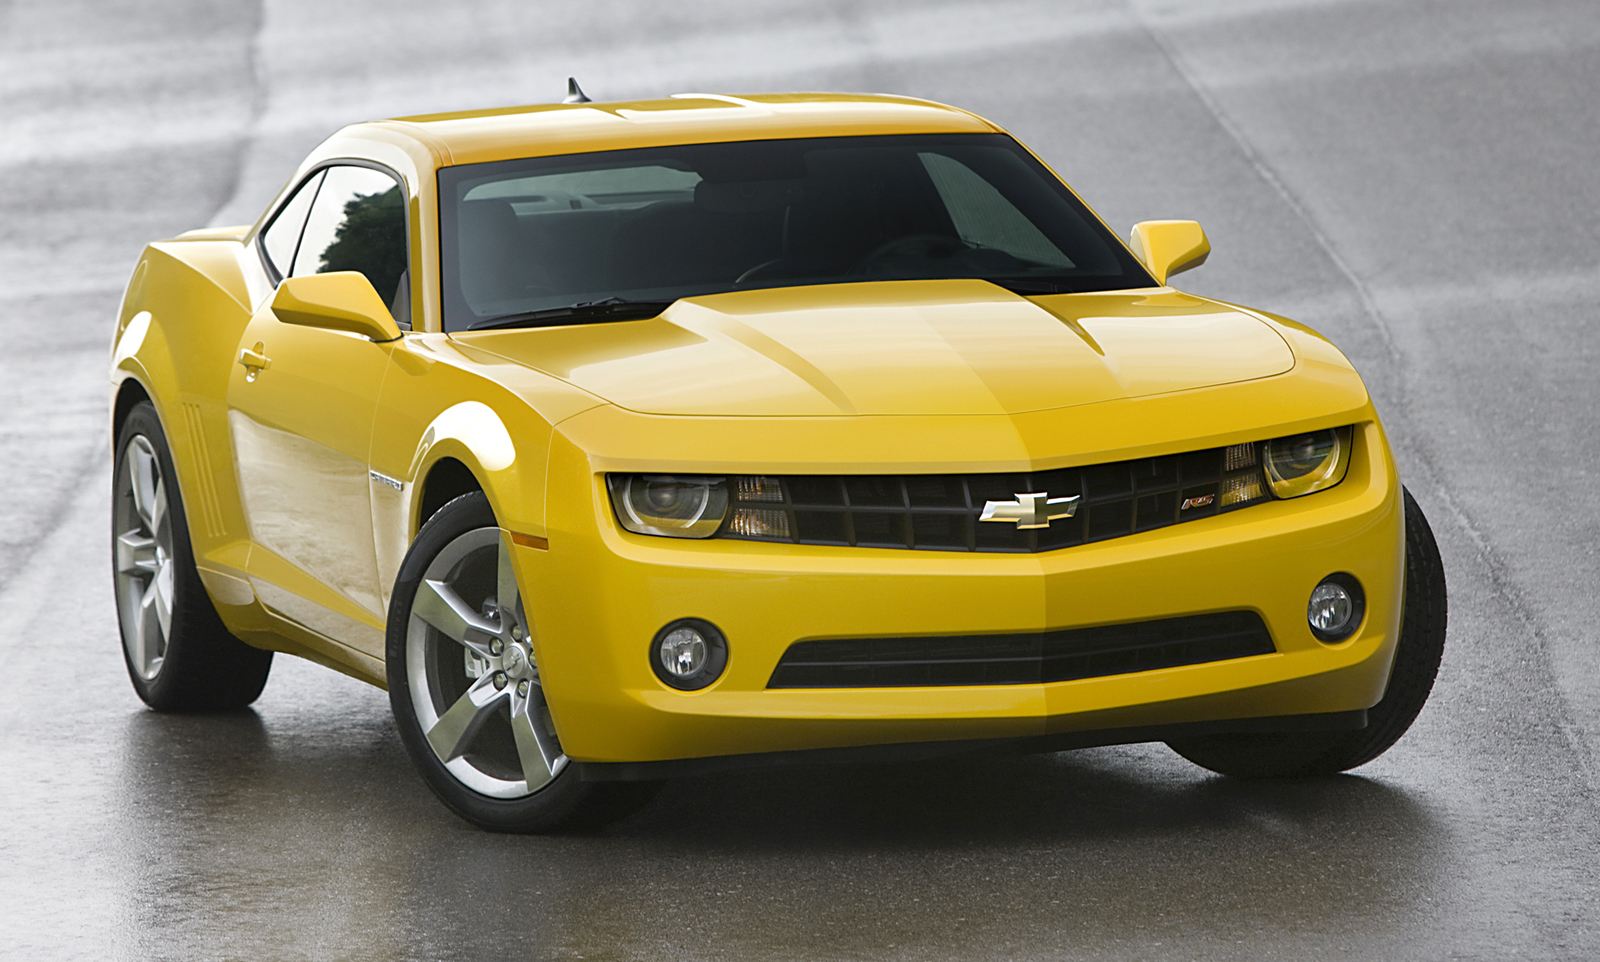 2011 Chevrolet Camaro - The Other American Sports Car